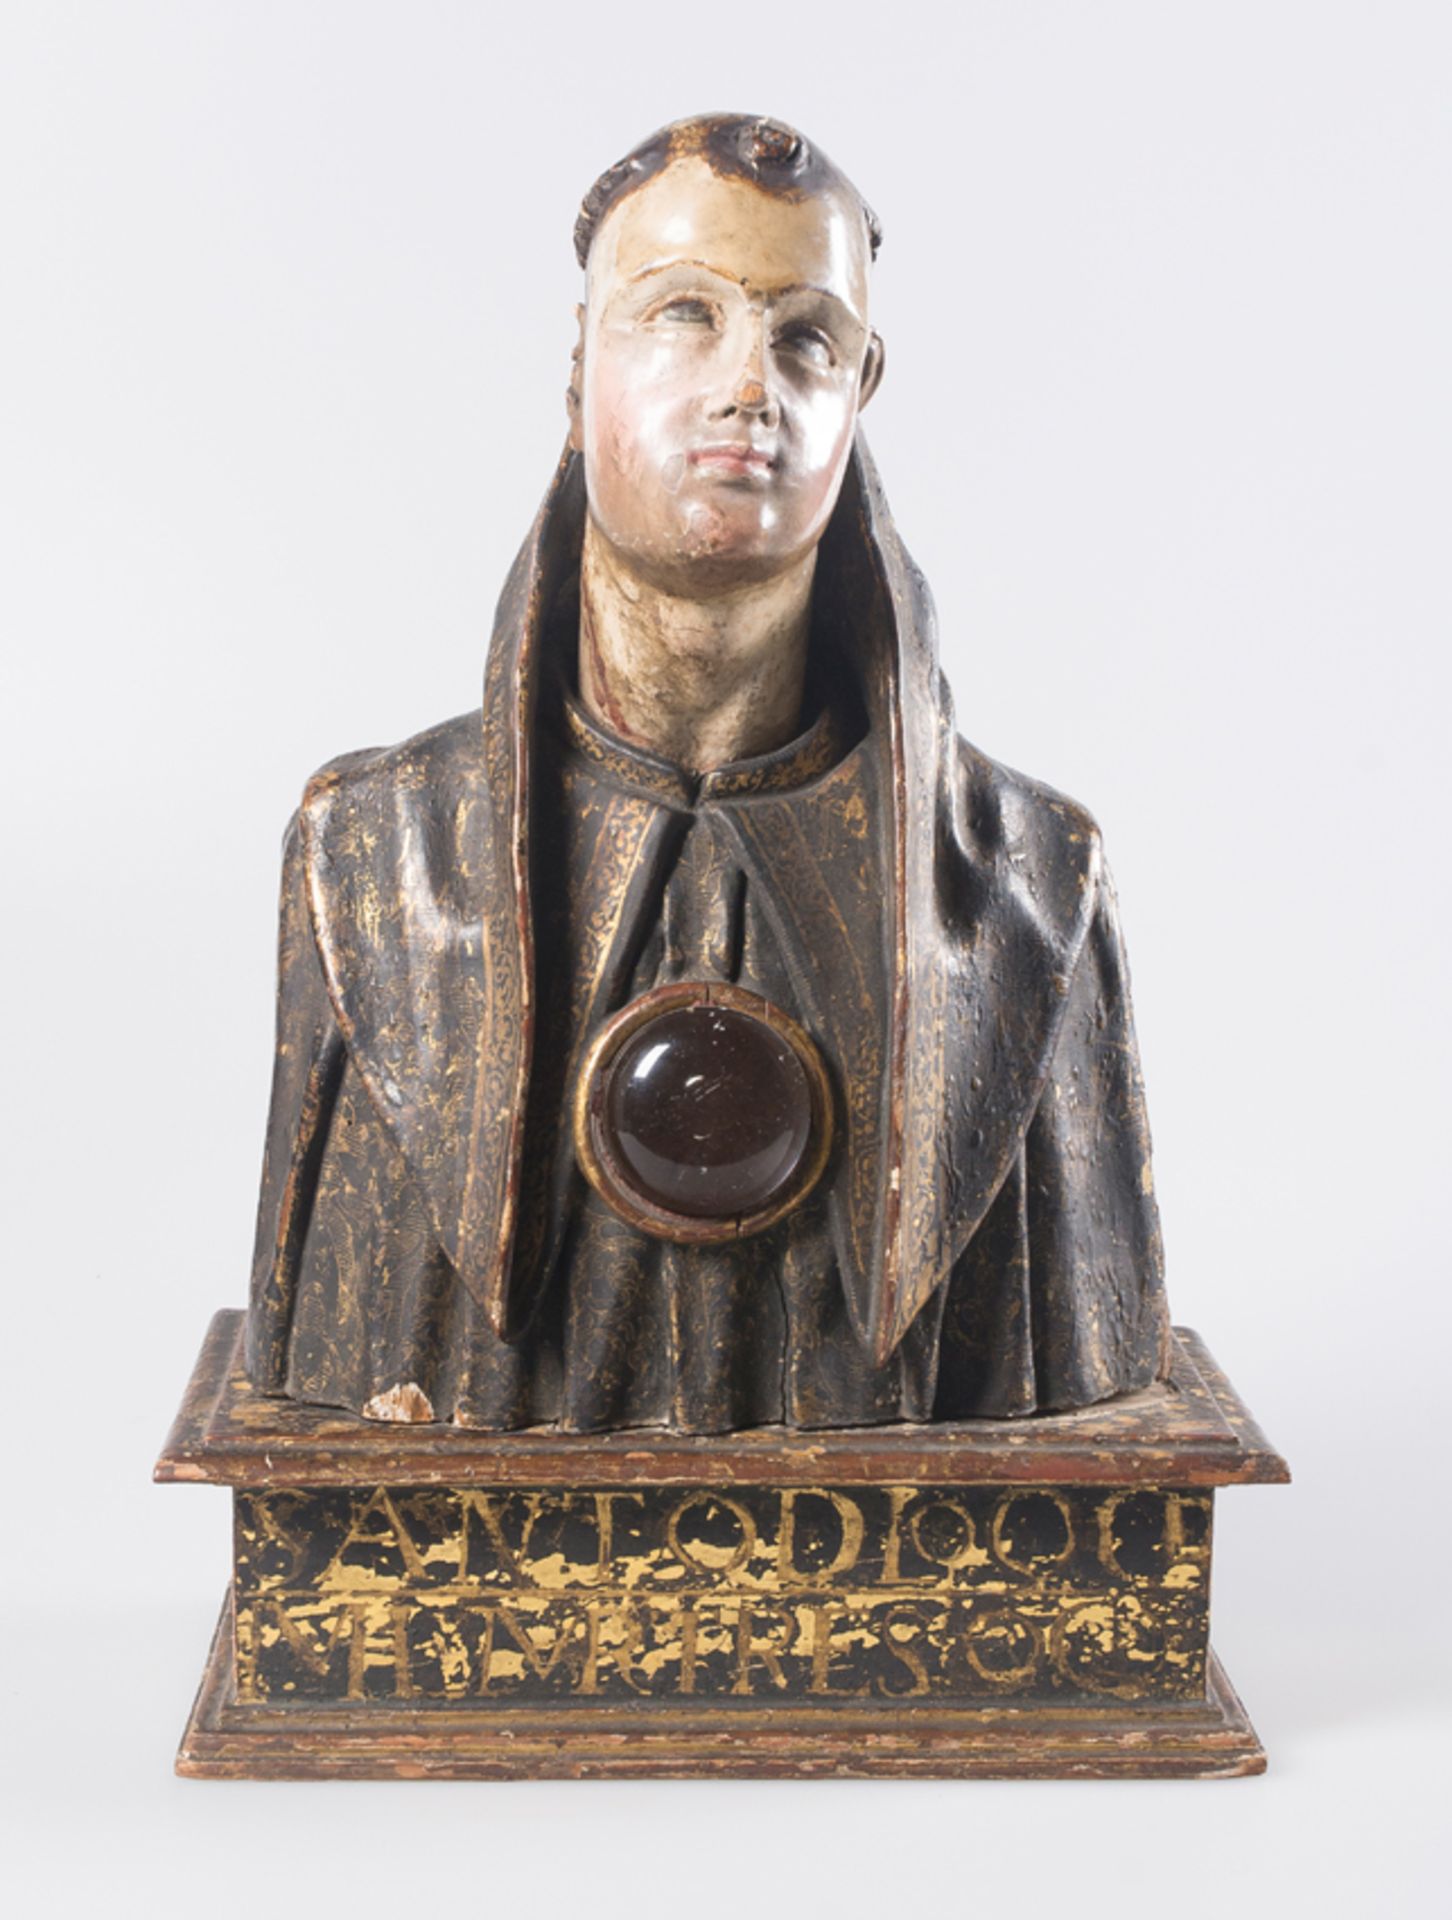 "Reliquary bust of a saint". Carved, gilded and polychromed wooden sculpture, with a large, central